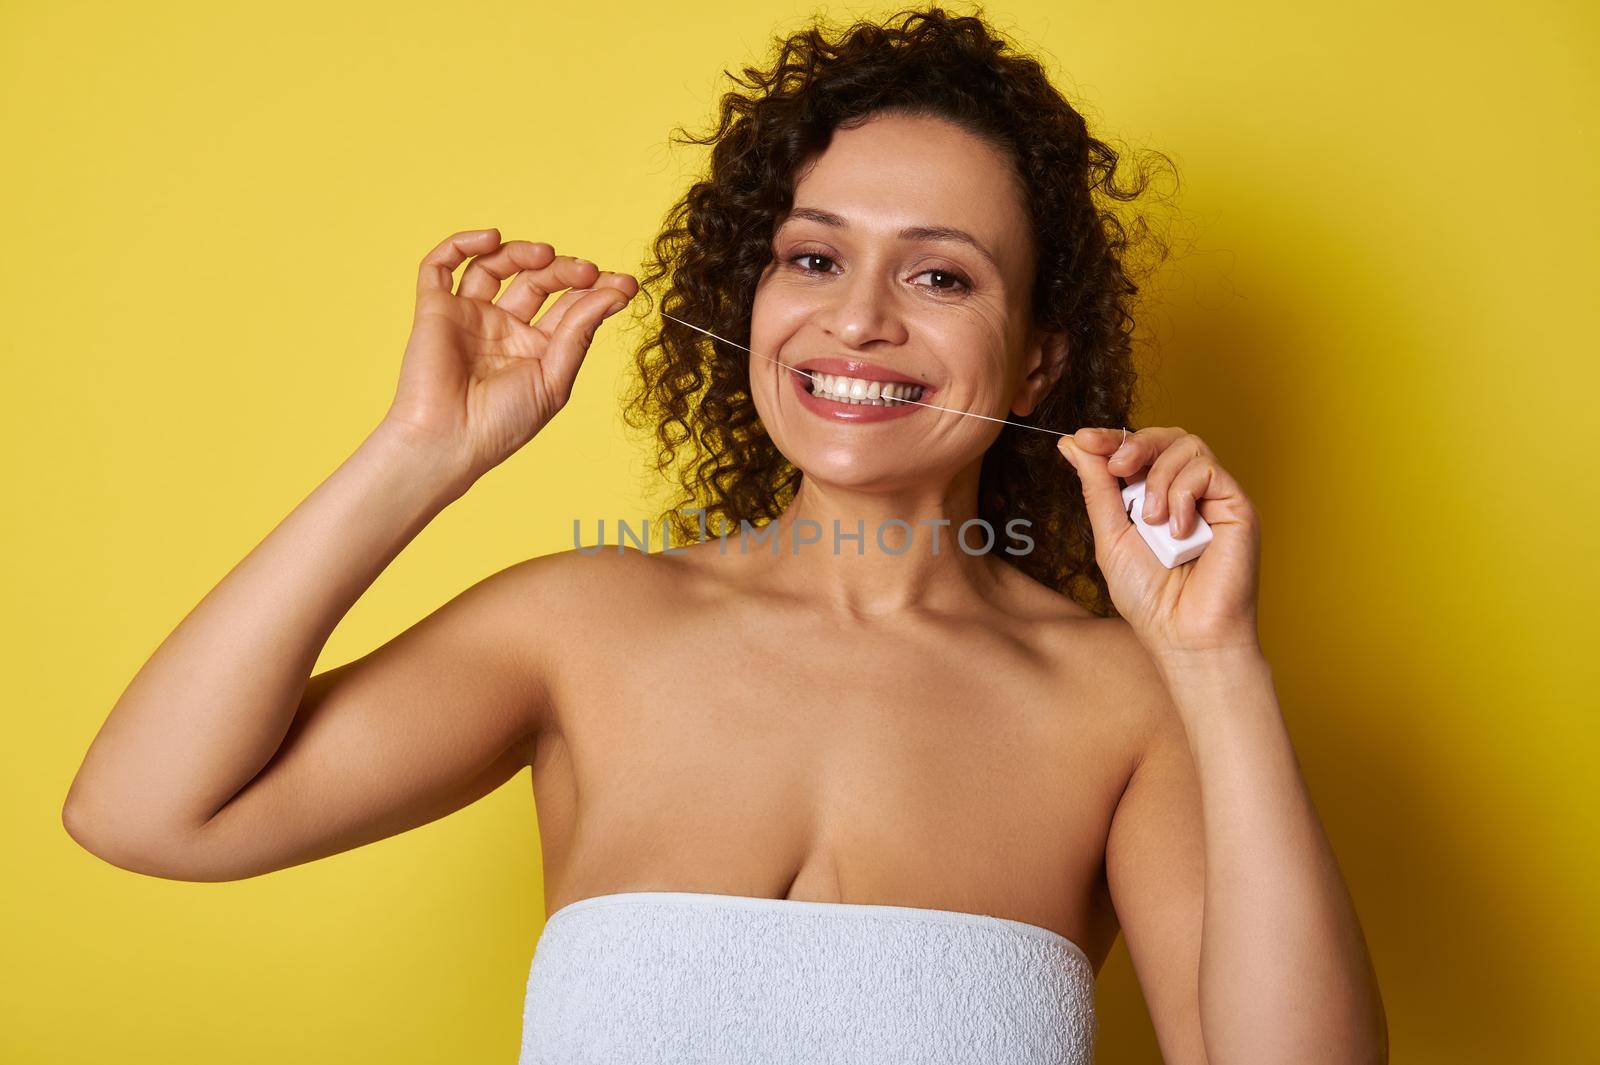 Smiling young woman taking care about her teeth by using a dental floss for cleaning dental cavity by artgf